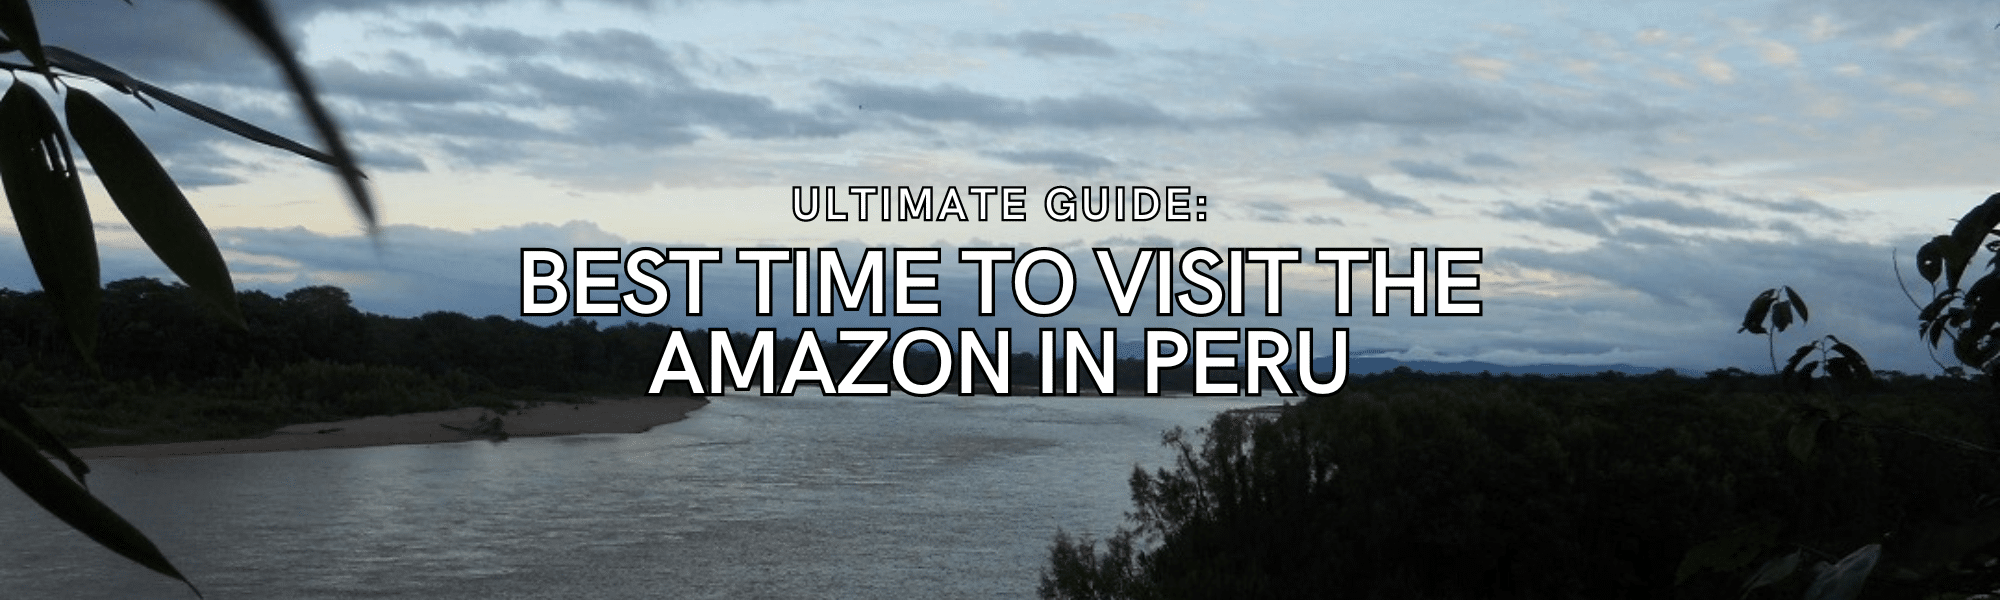 Best Time to Visit the Amazon in Peru